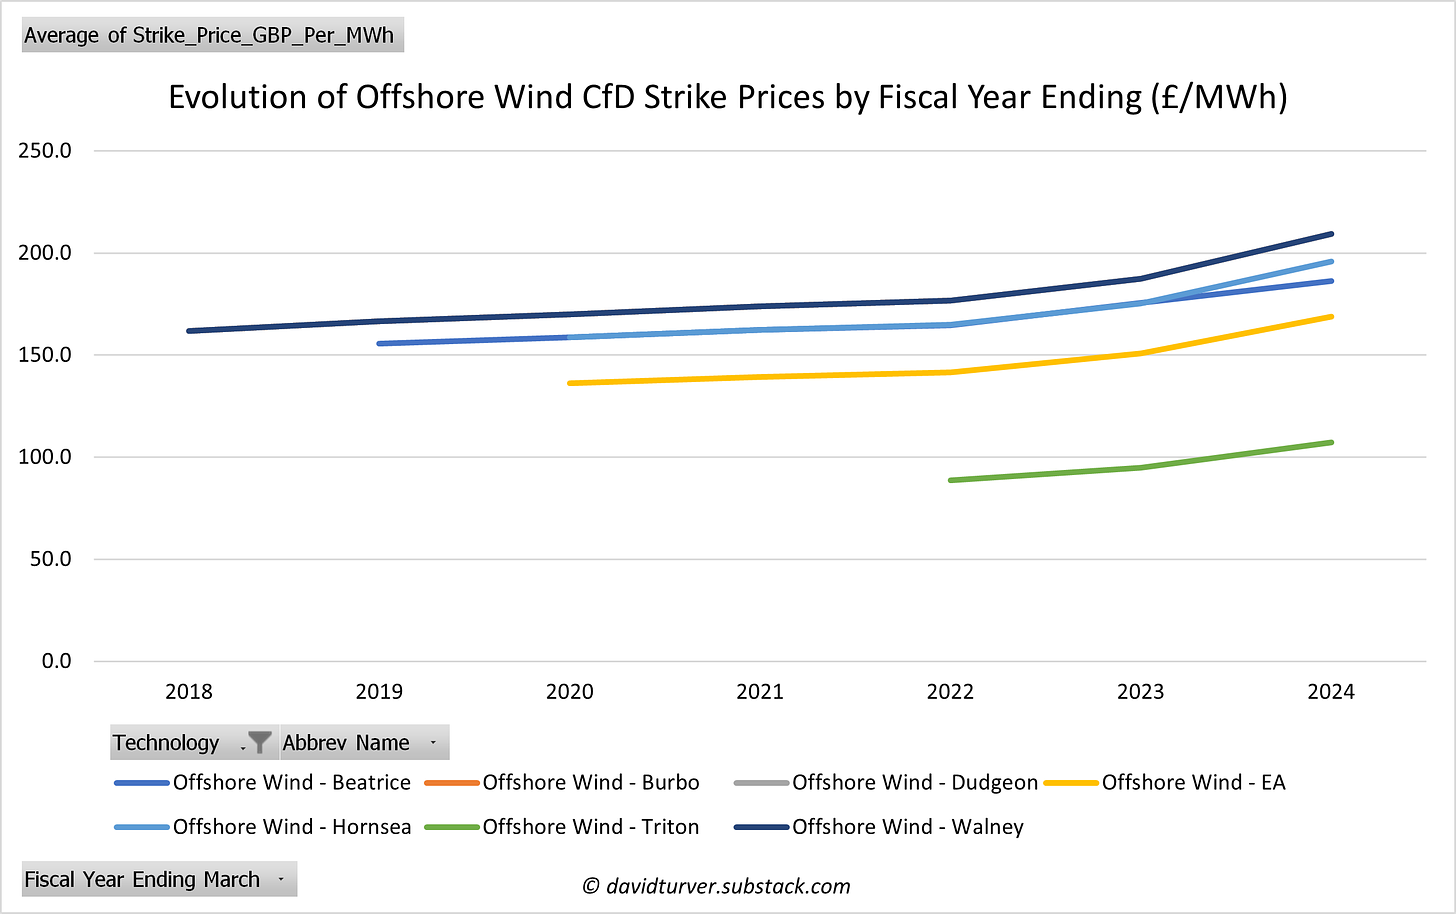 Evolution of Offshore Wind Strike Prices by Fiscal Year Ending (£ per MWh)